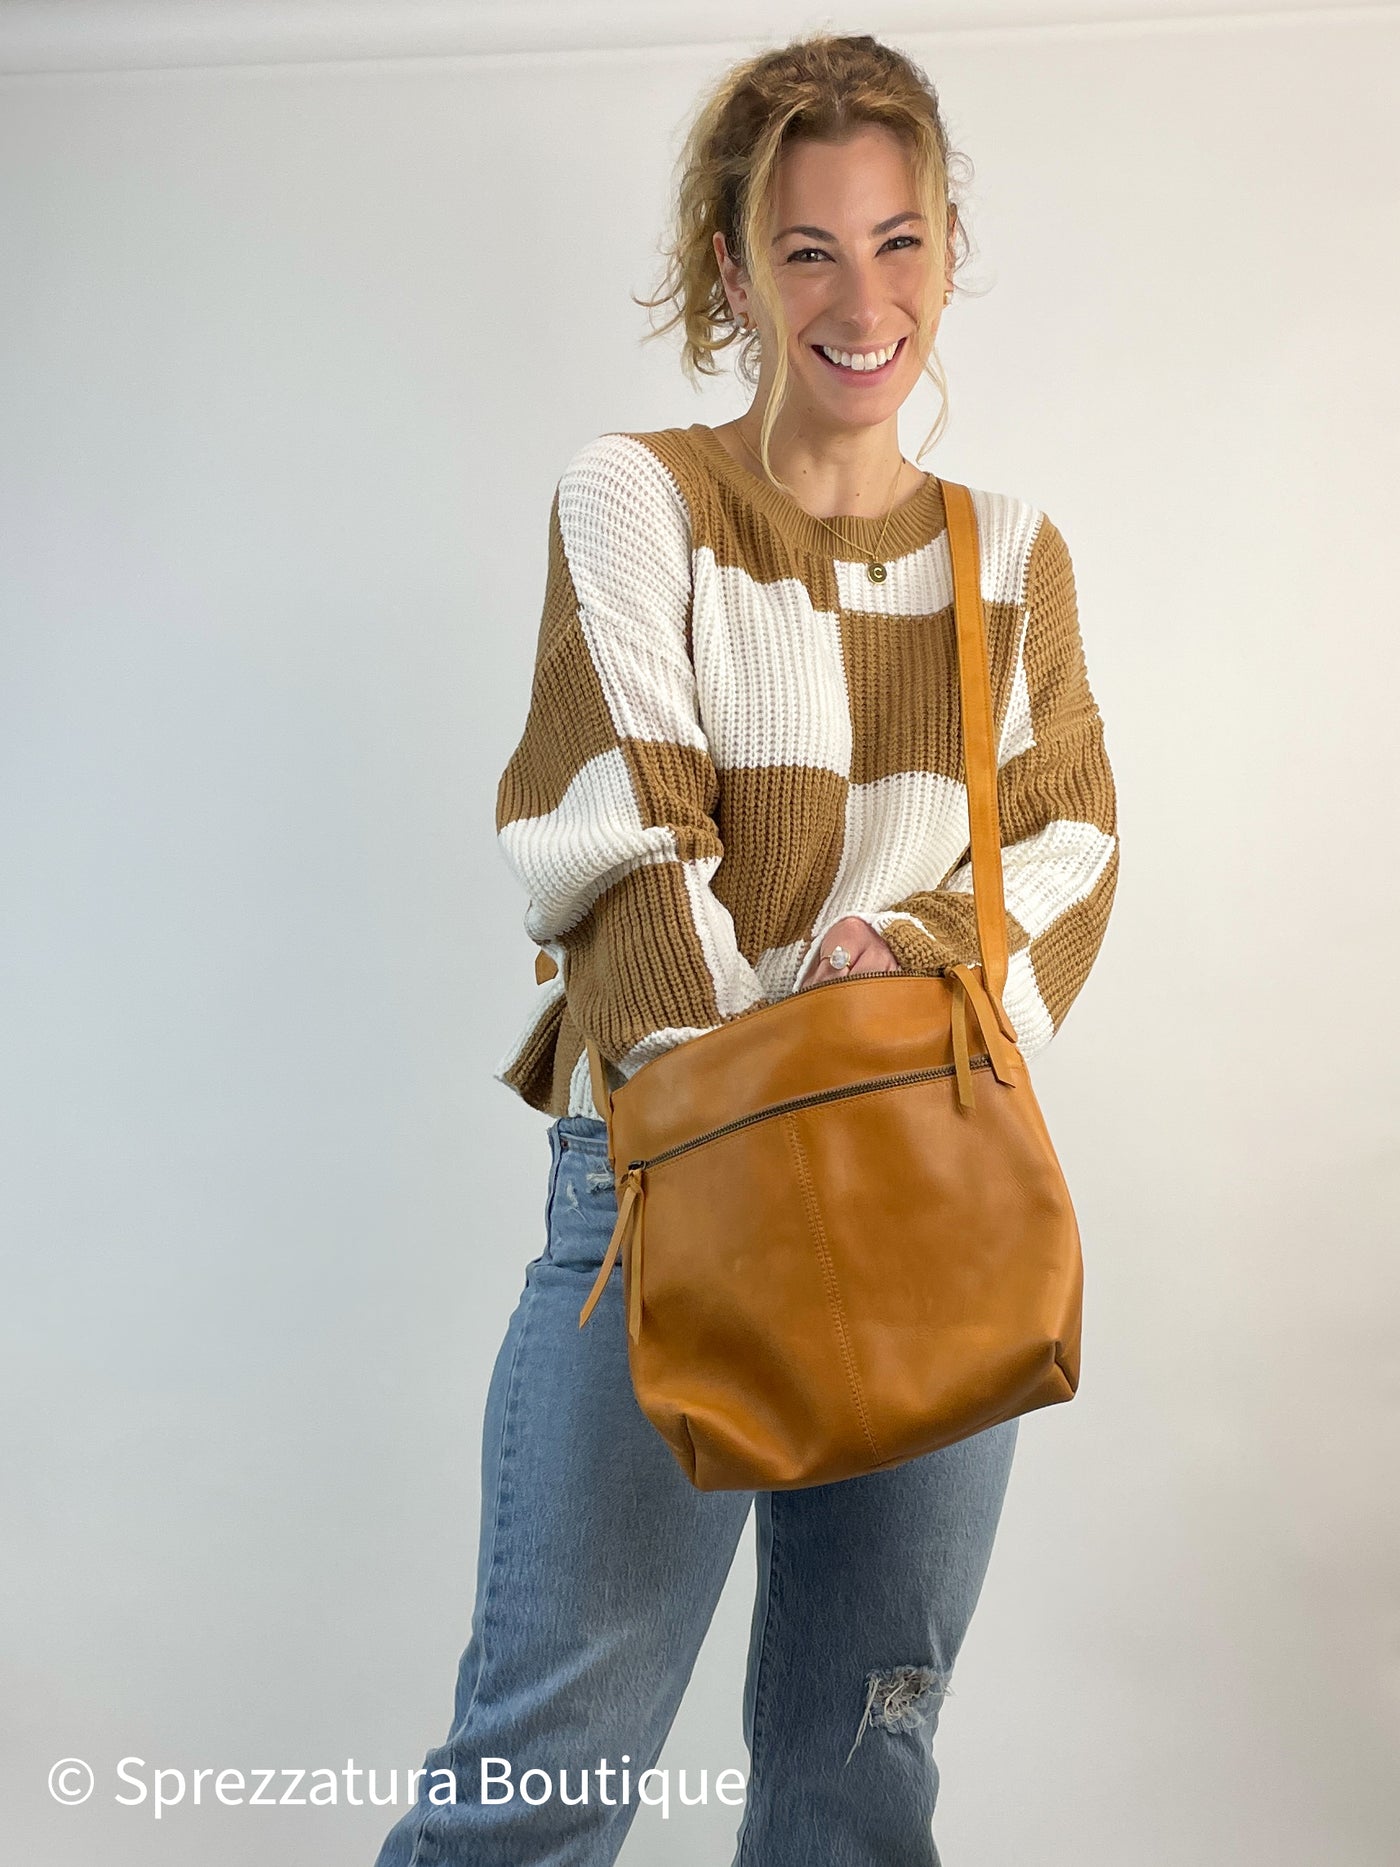 Cognac tan leather purse made by women paid a living wage ethical working conditions sustainable chic stylish timeless classic zipper crossbody purse empowering women. Modern smart causal female chic effortless outfit womens ladies gift elegant effortless clothing clothes apparel outfits chic summer style women’s boutique trendy fall back to school teacher office cute outfit  lounge athleisure midsize curvy sizes